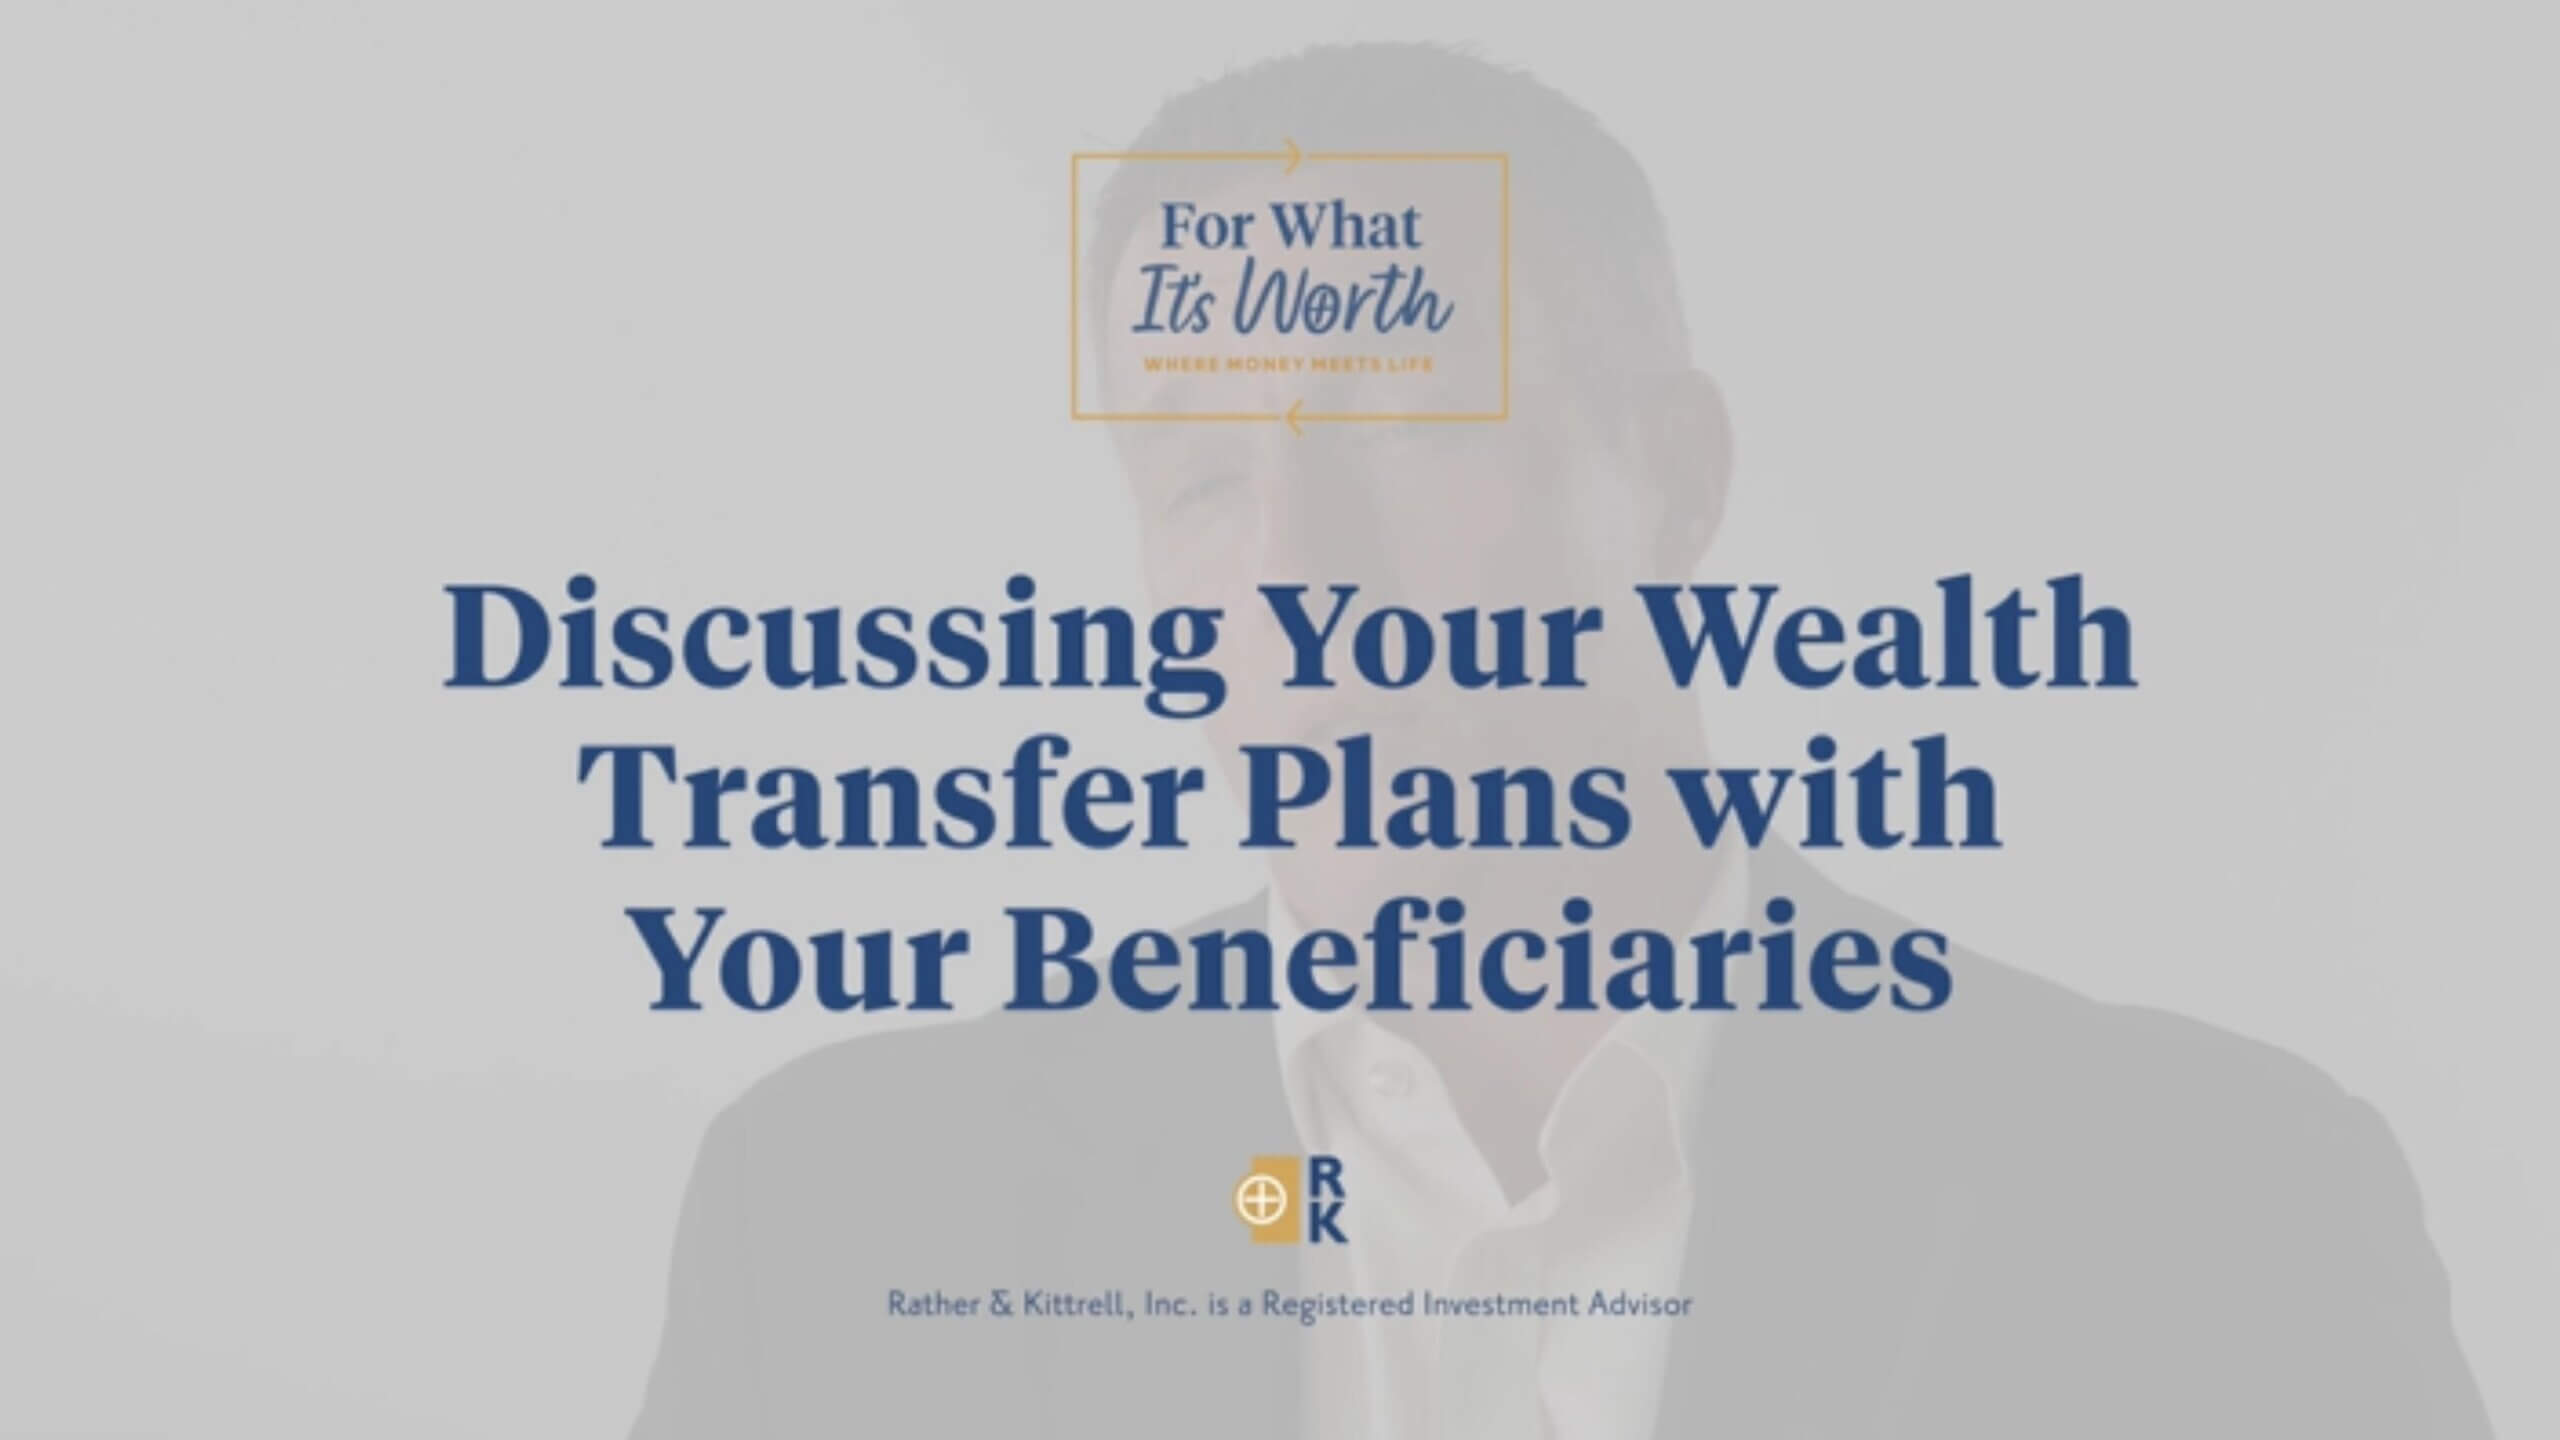 Discussing your wealth transfer plans with your beneficiaries